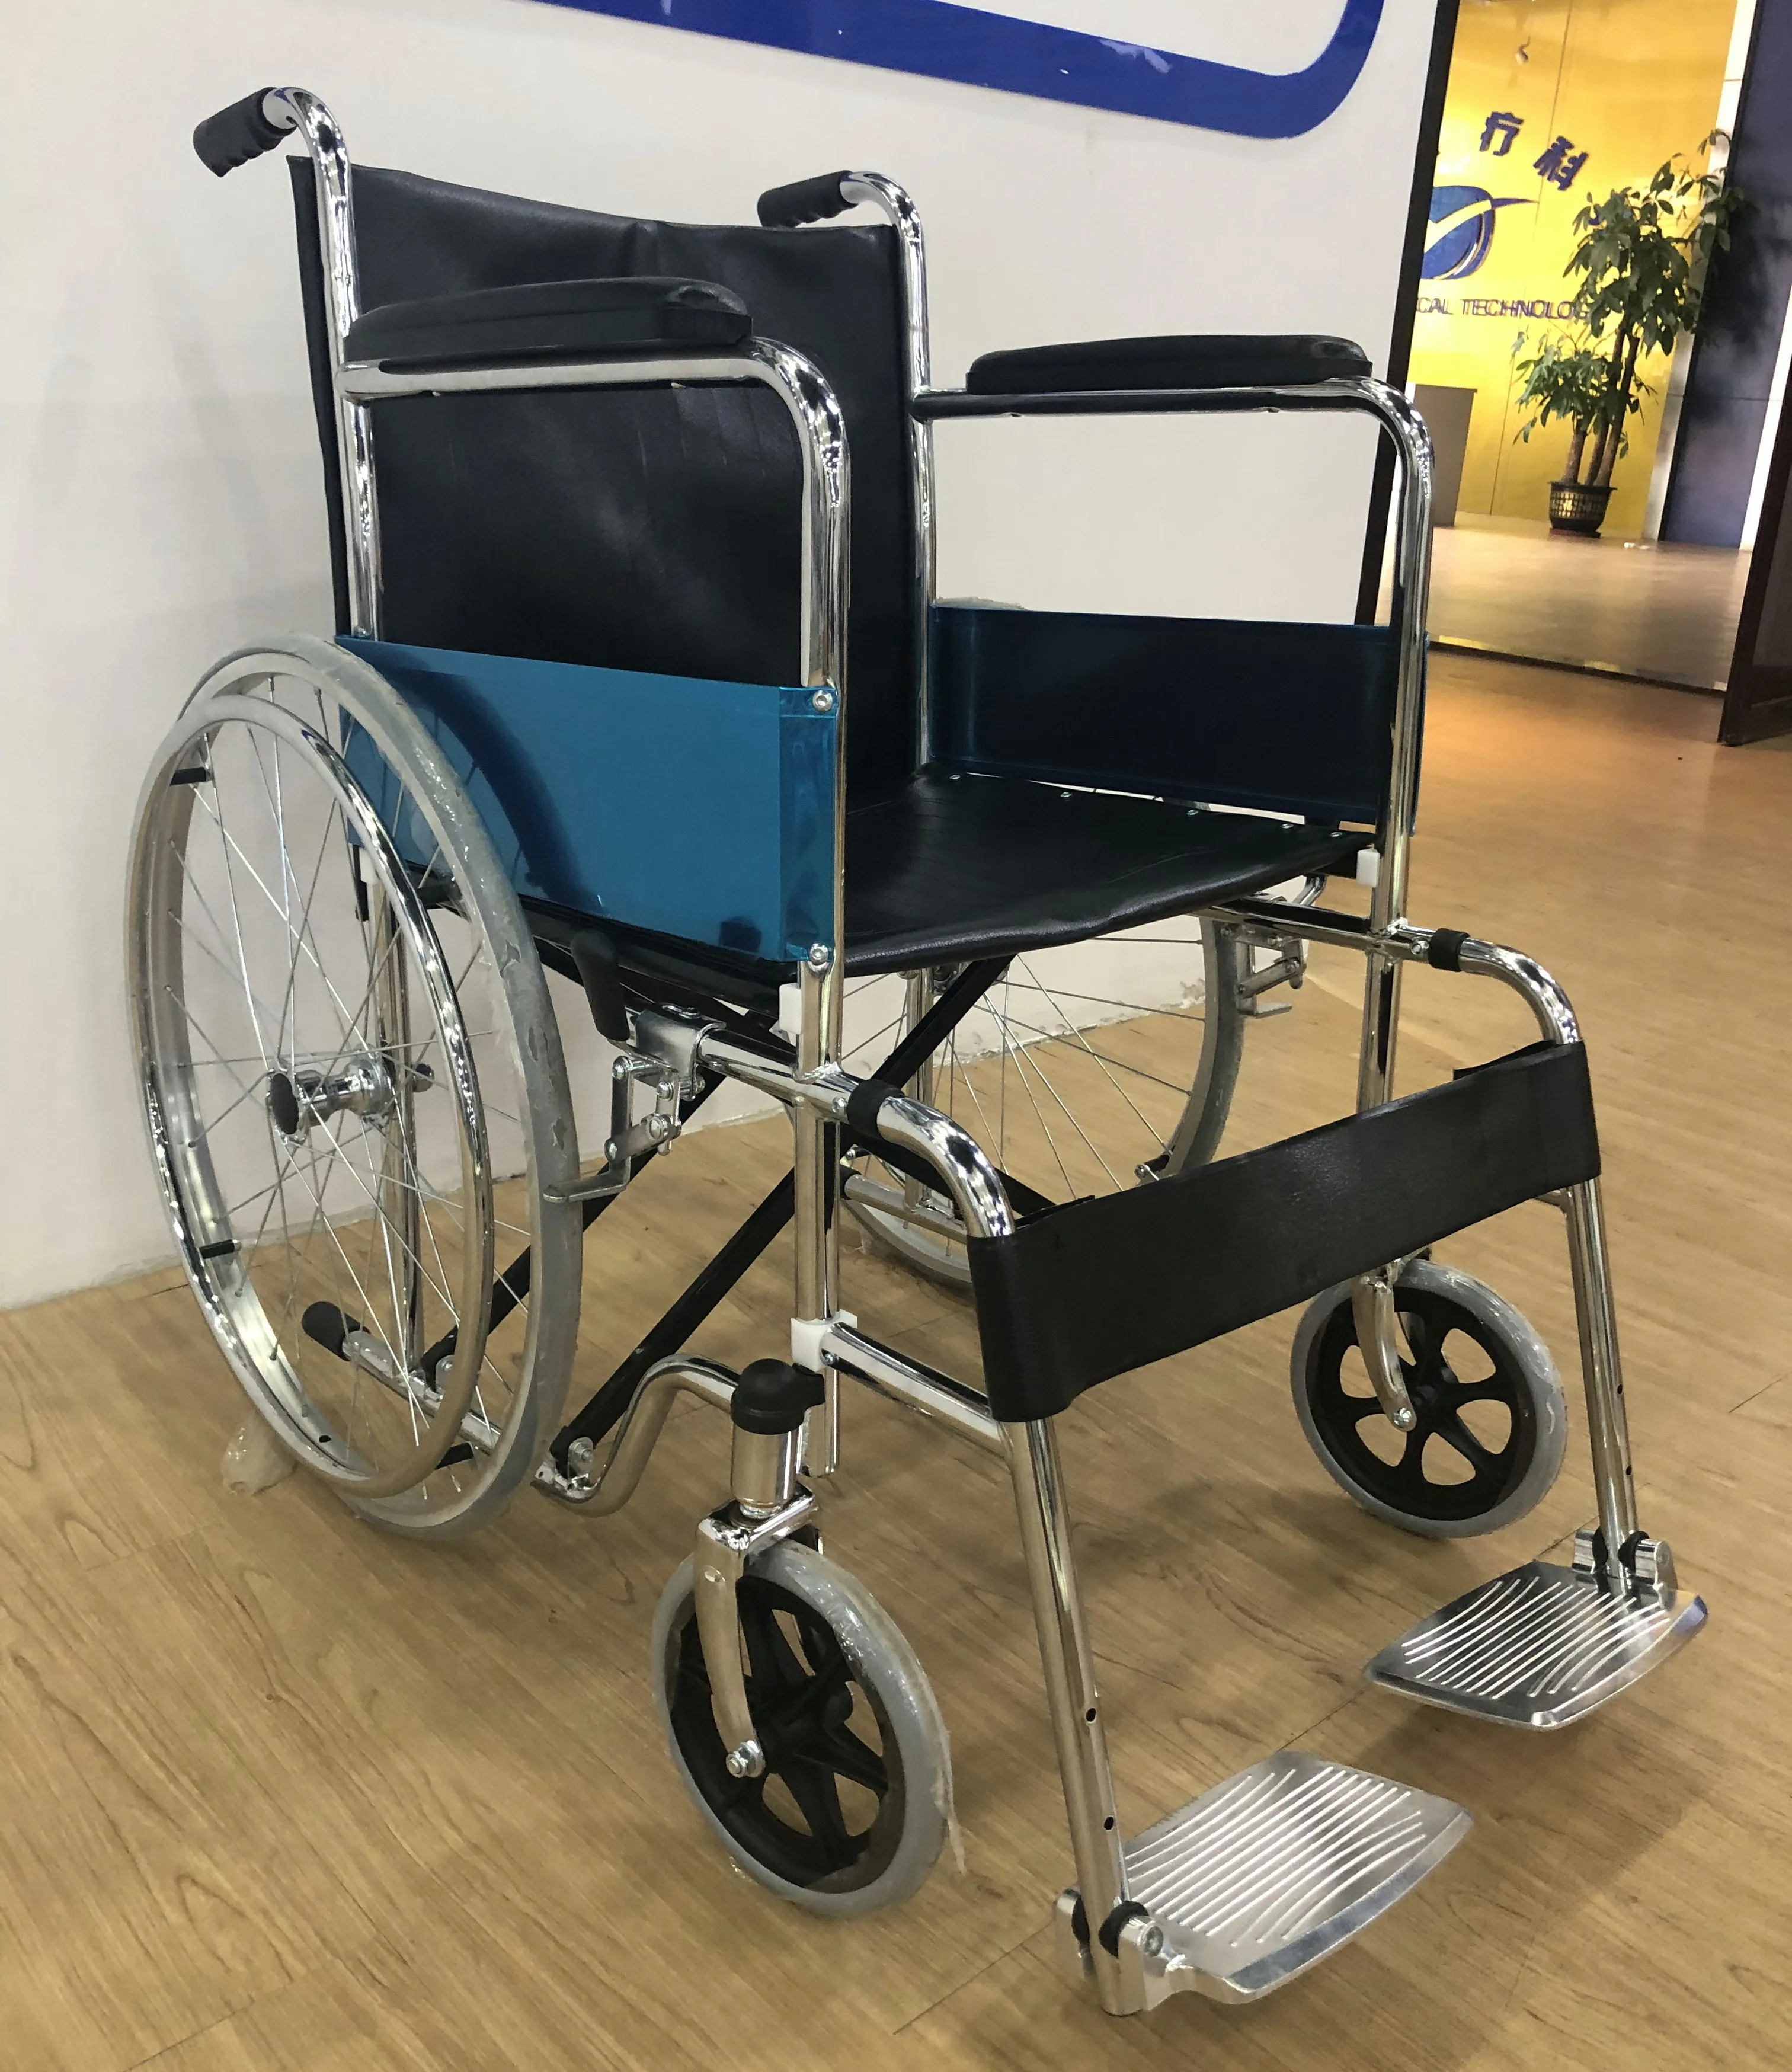 20 Days Delivery Time Cheap Chrome Steel Manual Wheelchair Dy809 - Buy ...